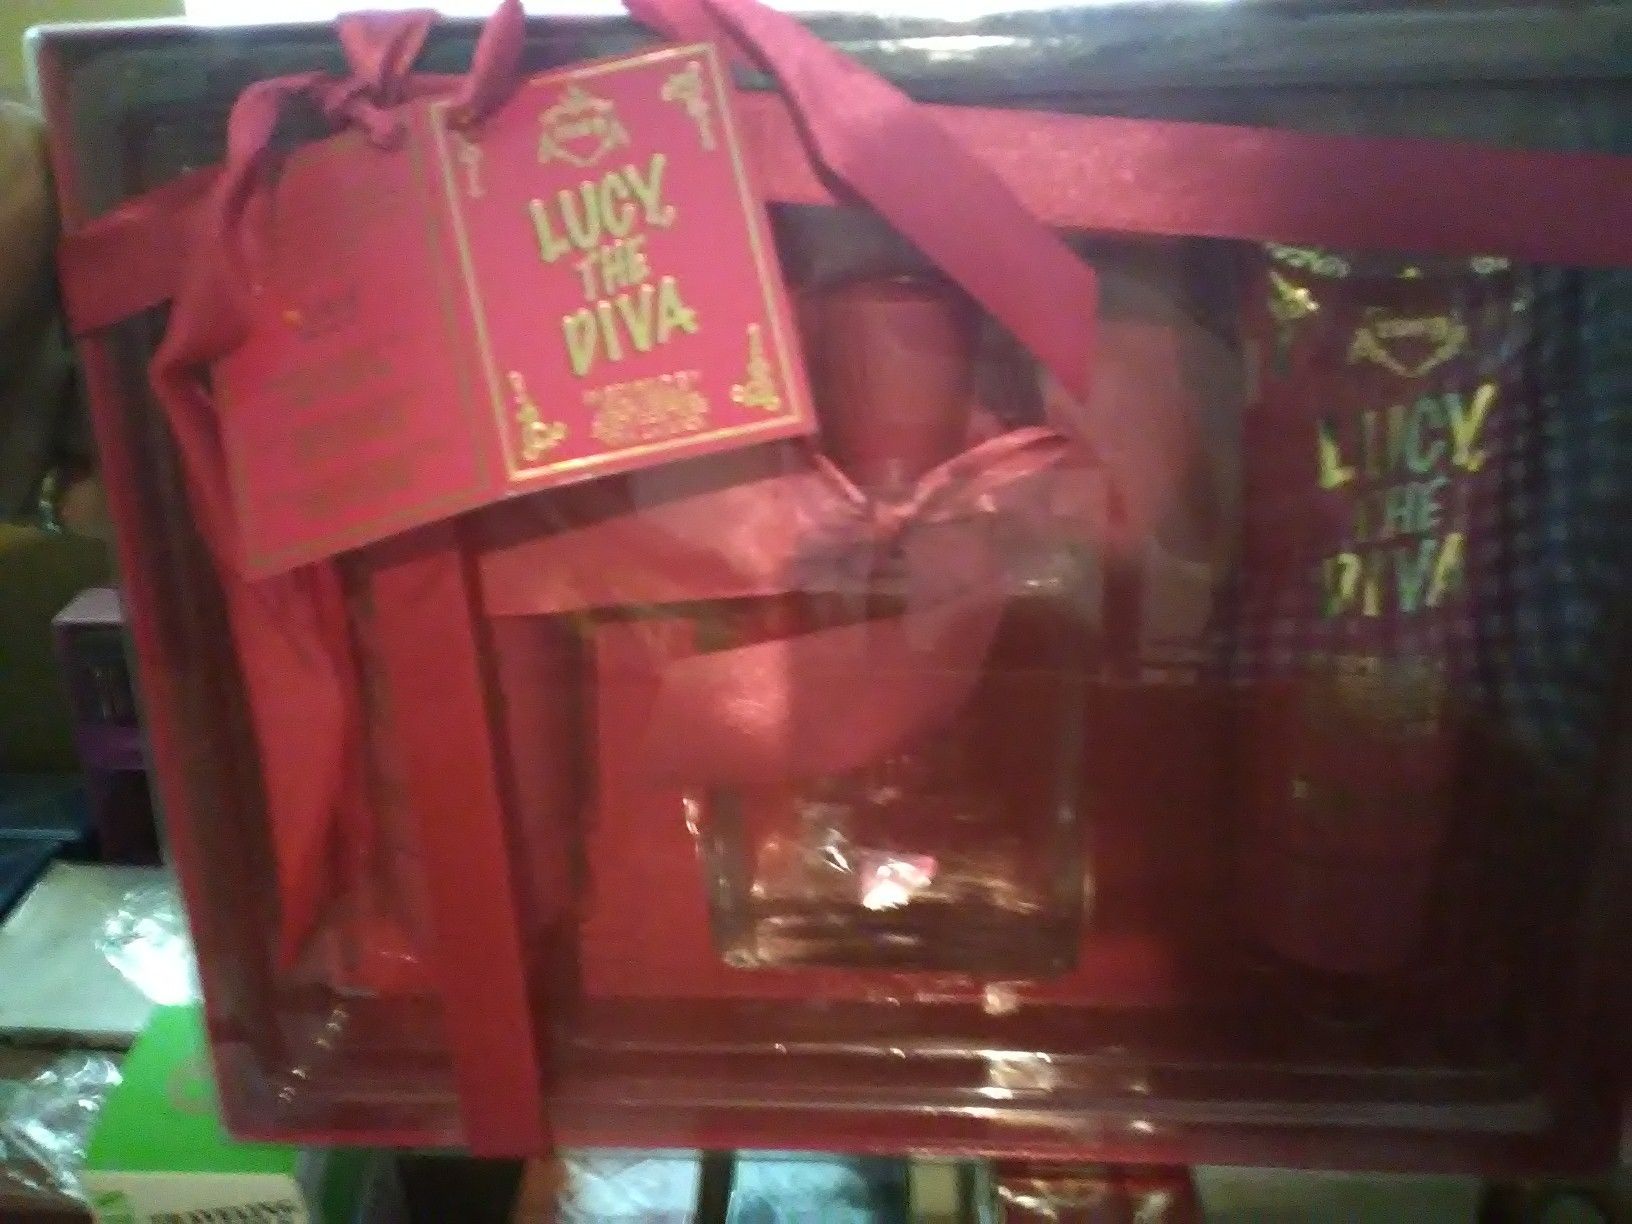 Lucy the Diva perfume gift set impression of juicy